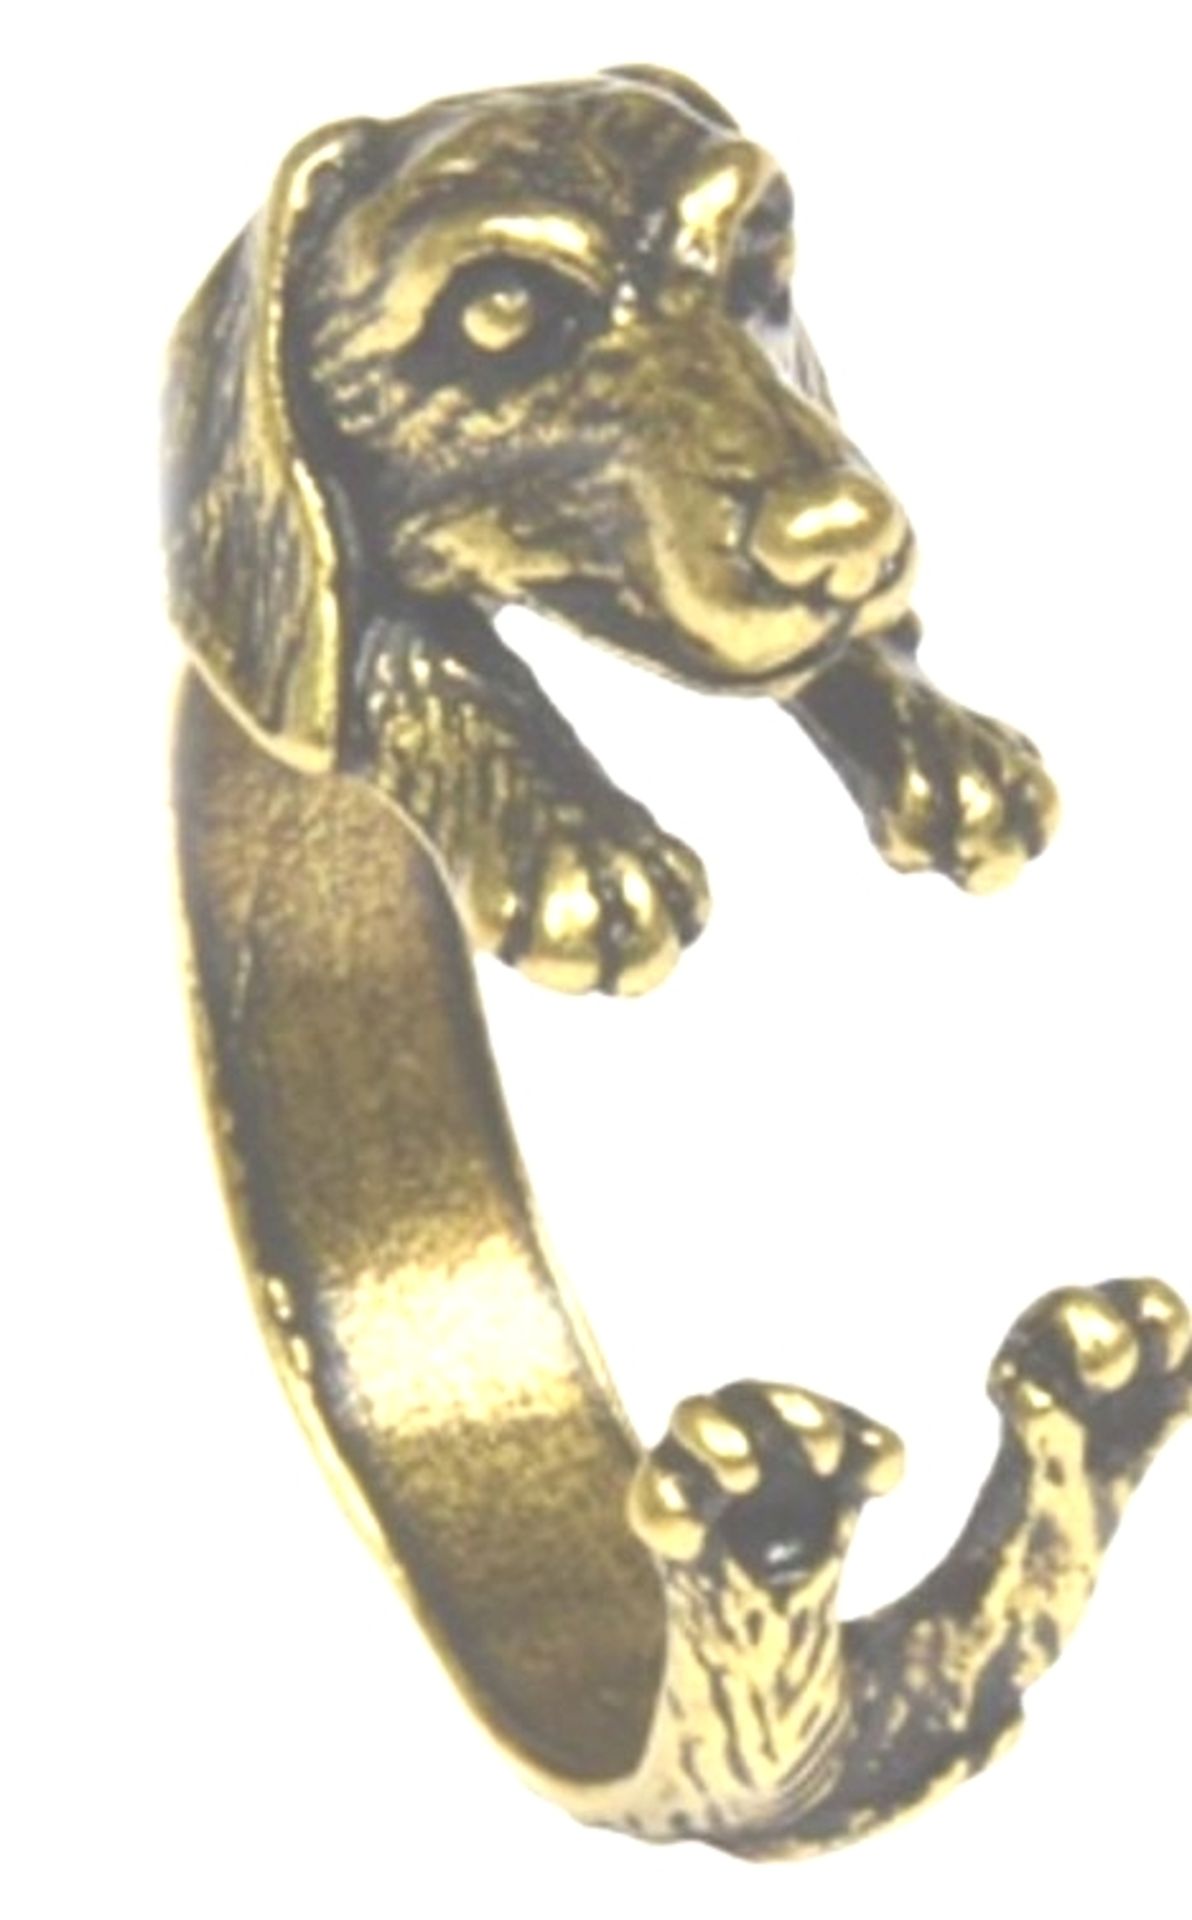 50 Unusual Animal Rings, Can Be Adjusted Easily To Fit Most Fingers - Image 2 of 6